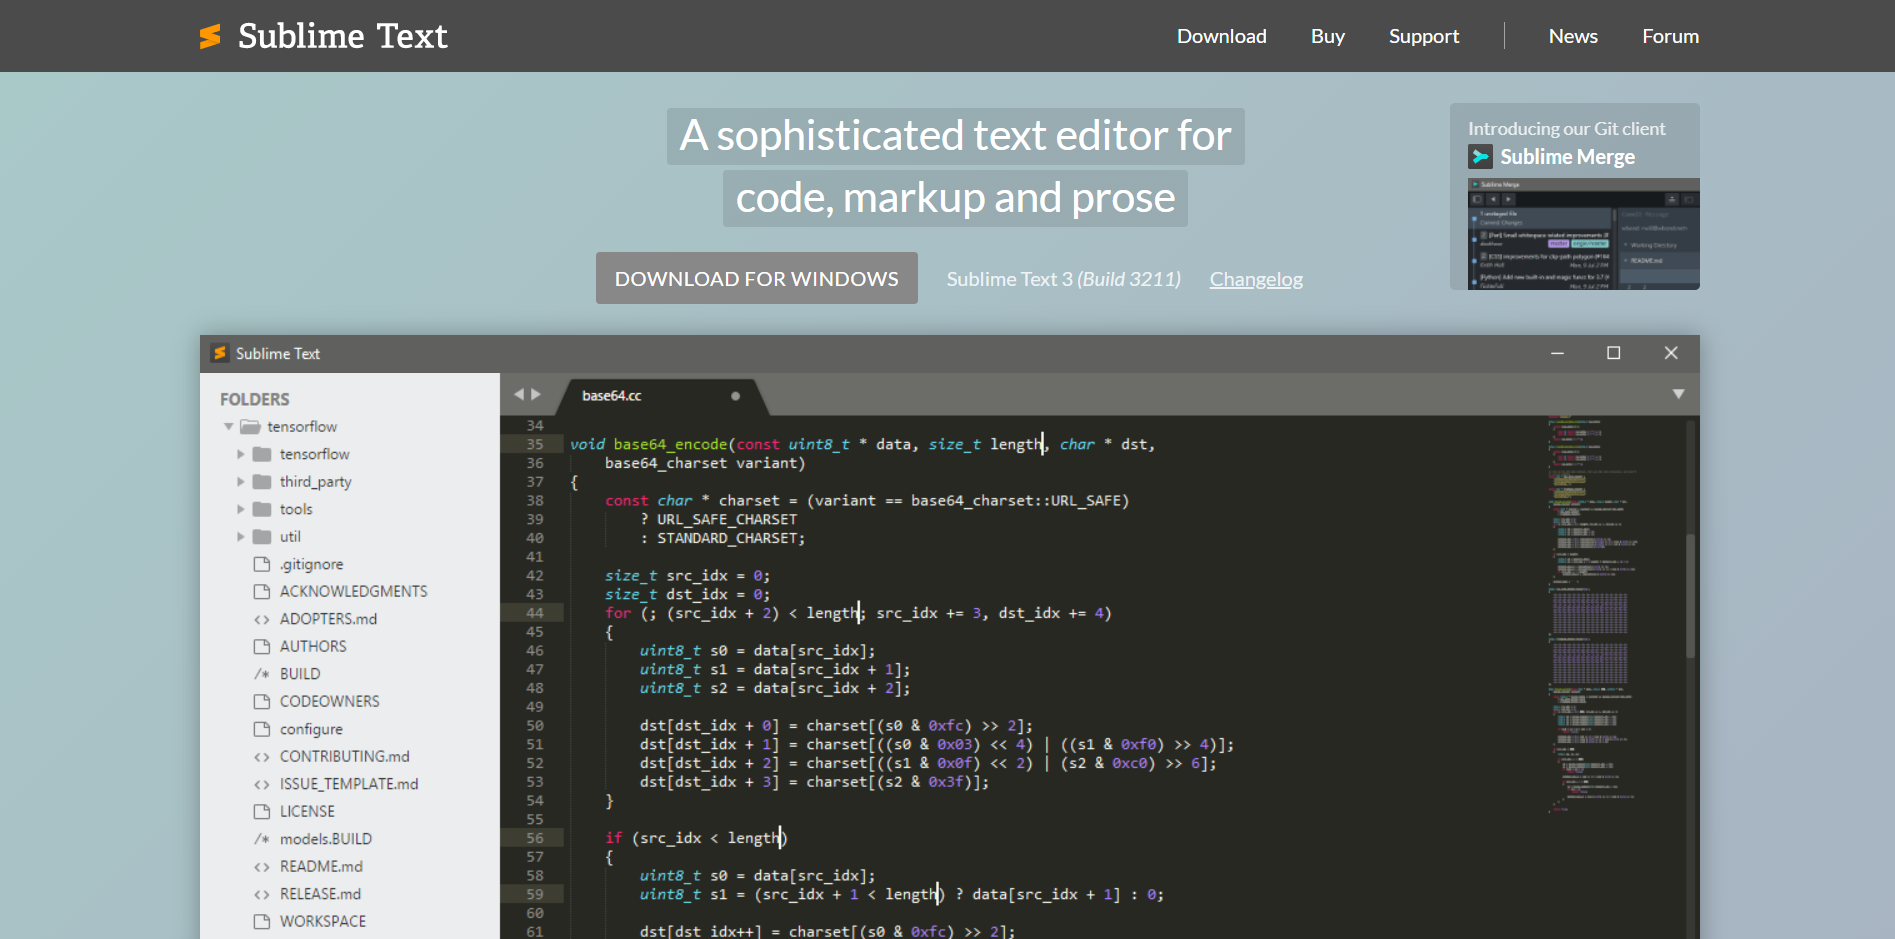 Sublime Text landing page